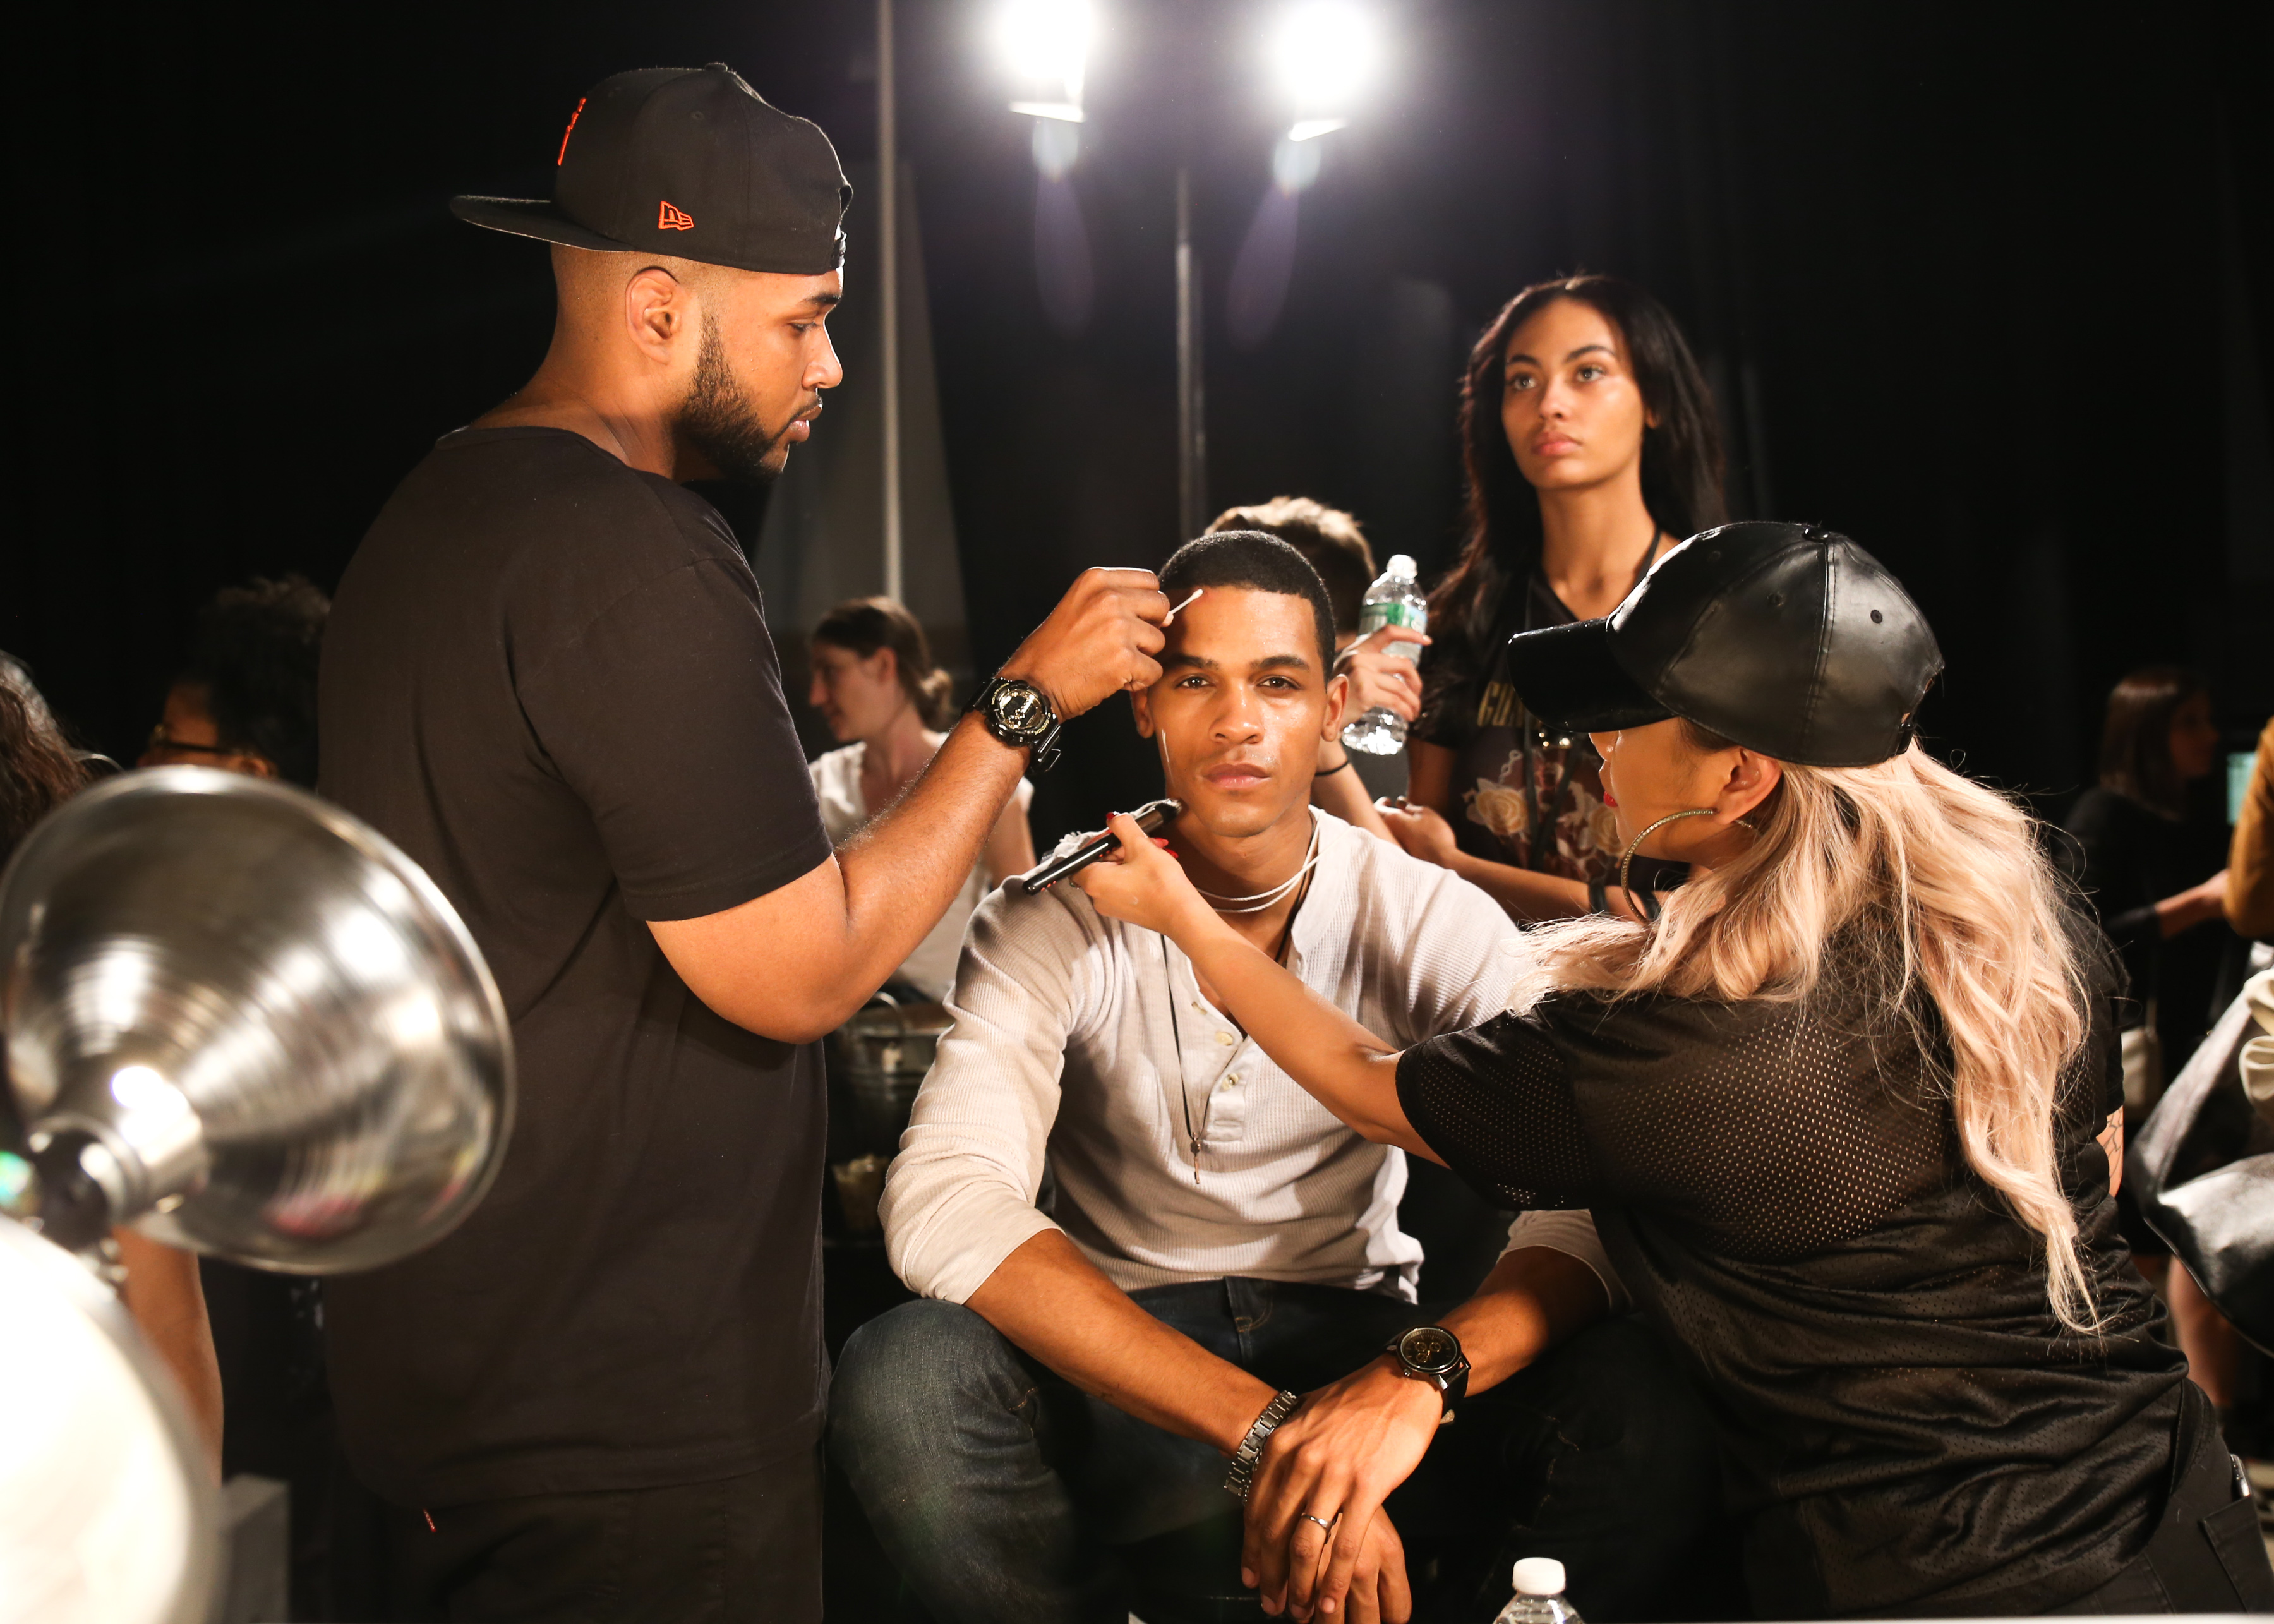 20 of the Best Backstage Shots at Balmain x H&M - Daily Front Row